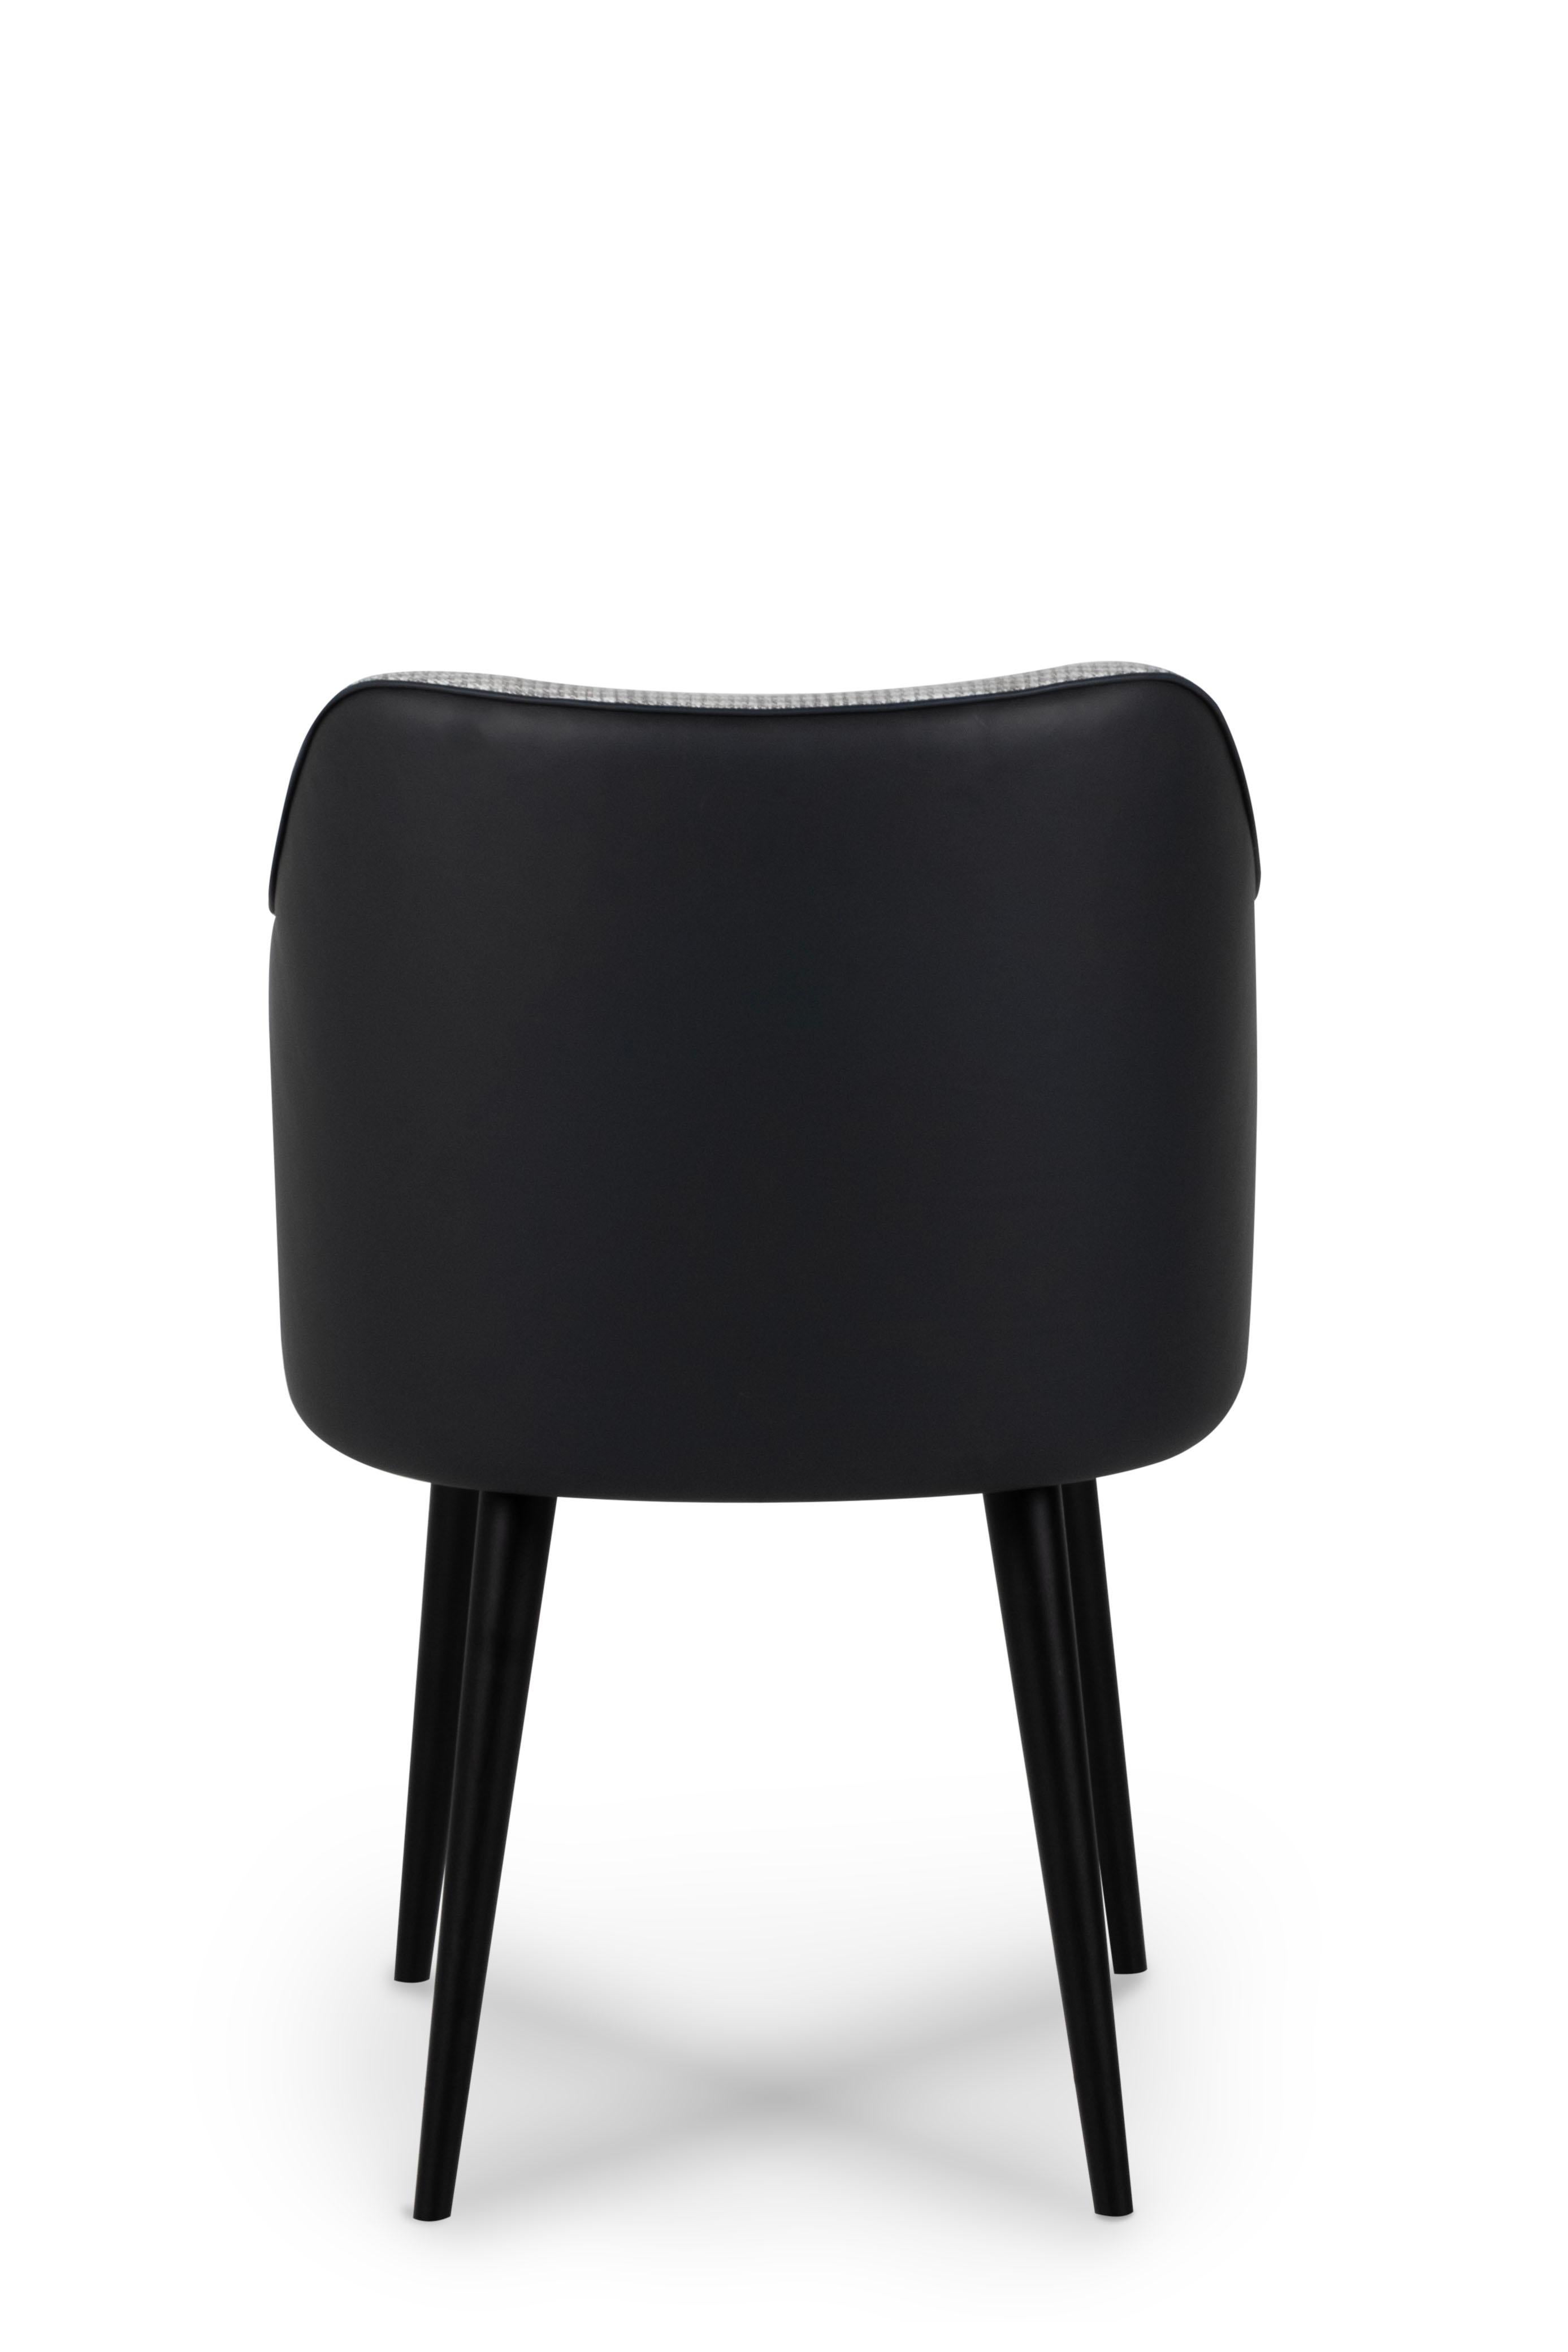 Portuguese Modern Margot Dining Chairs, Black Leather Grey, Handmade Portugal by Greenapple For Sale